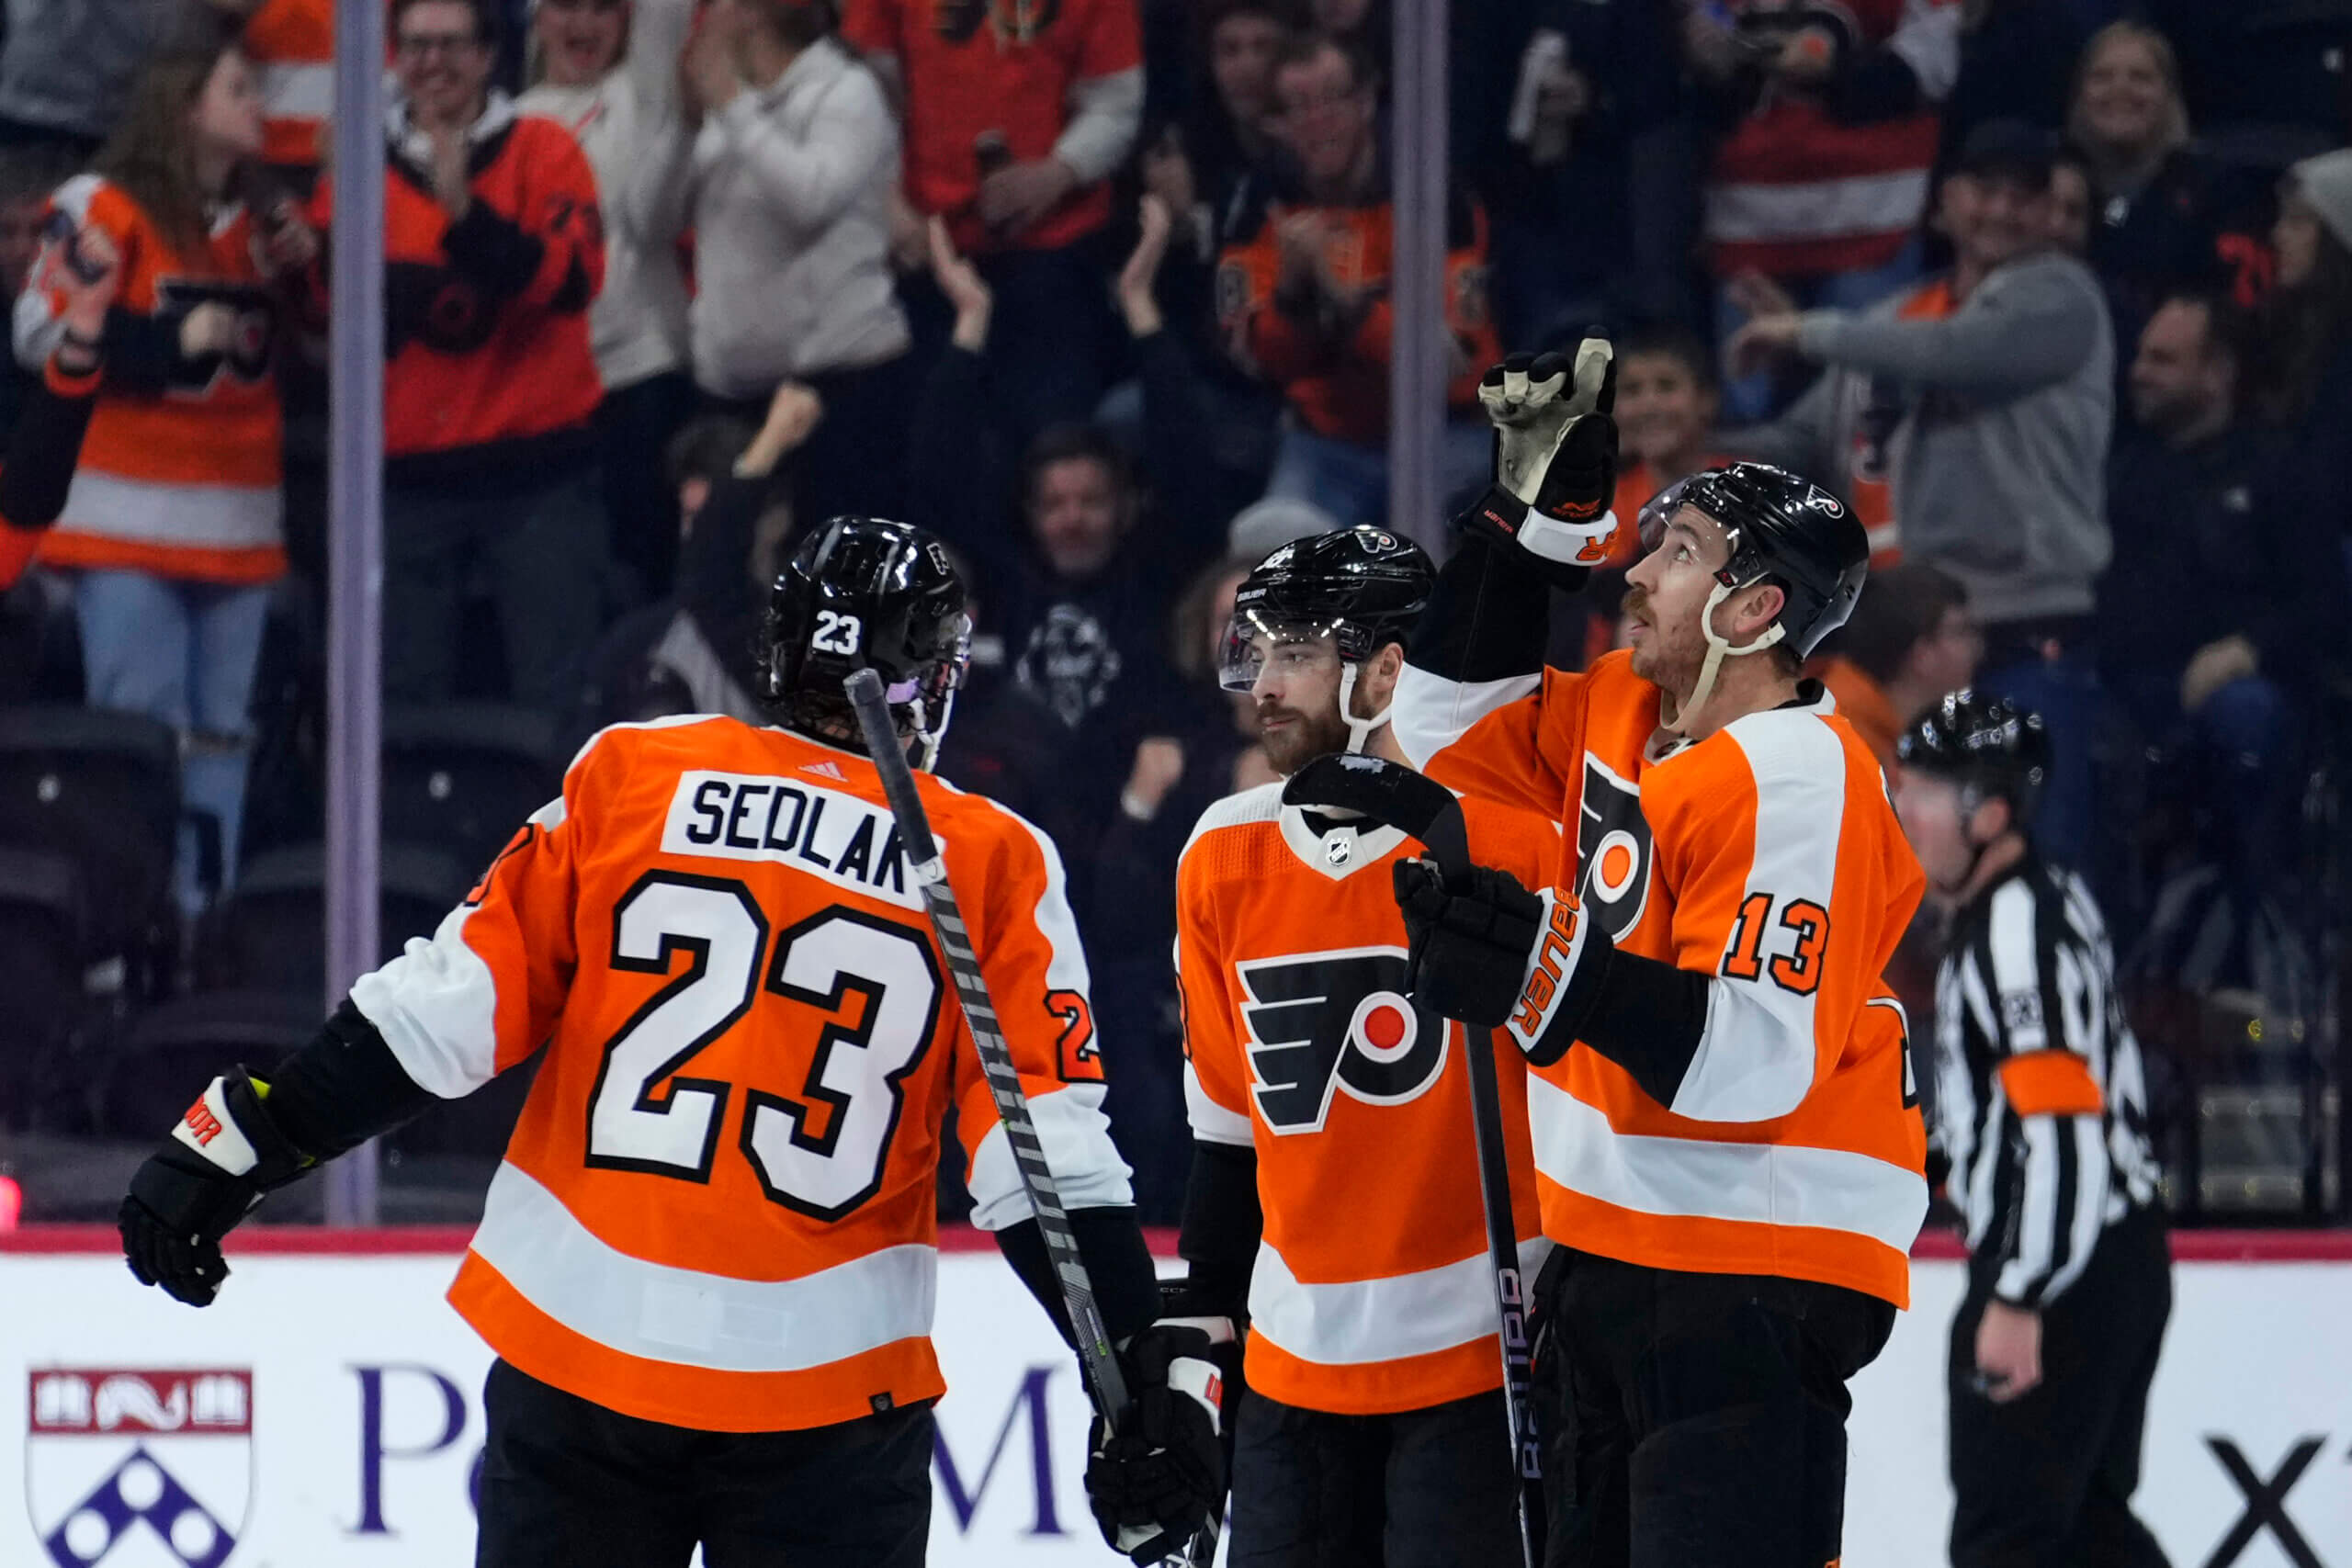 Hayes leads Flyers to win over Islanders